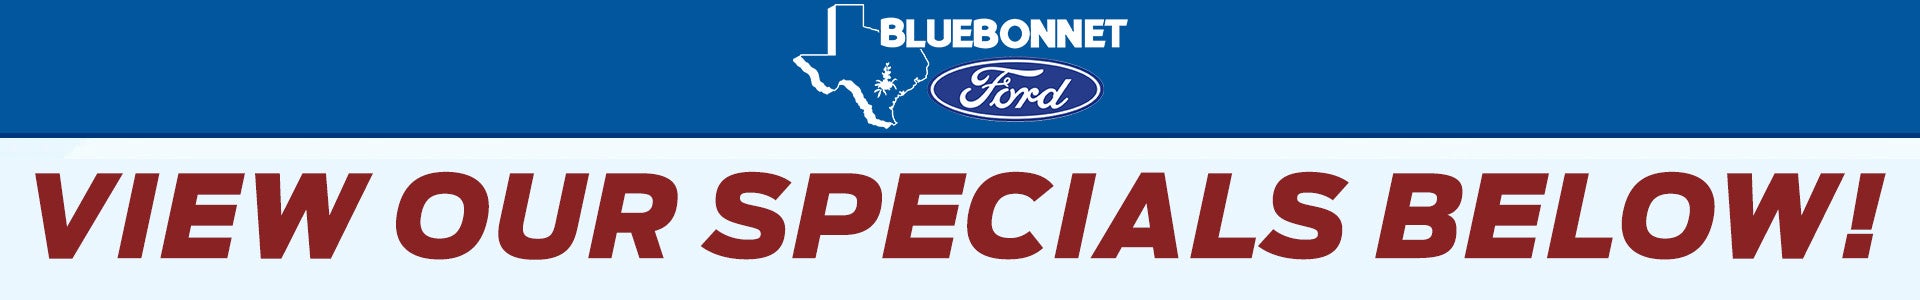 Bluebonnet Ford Weekly Ad Header